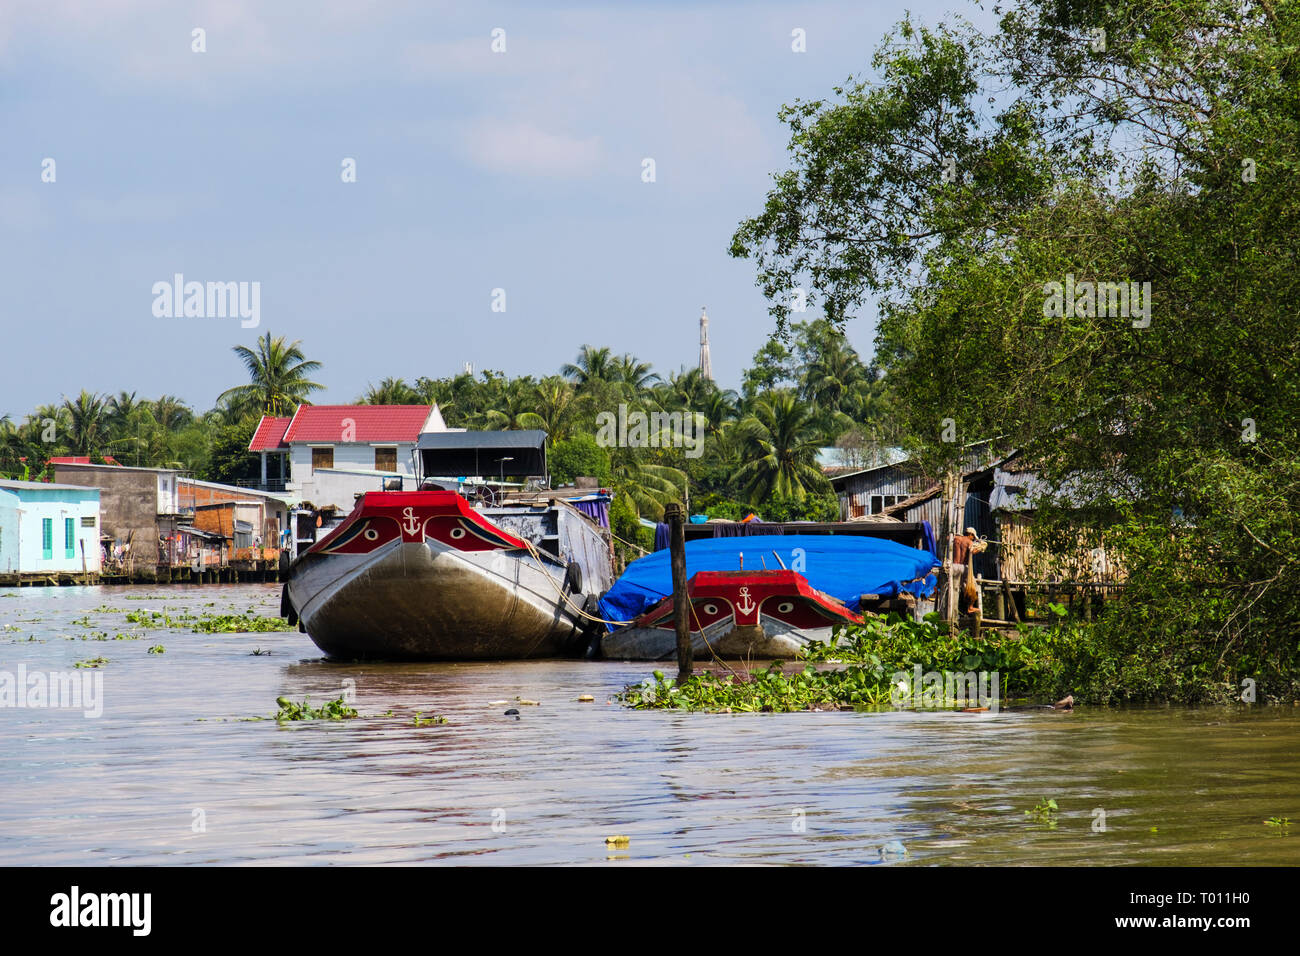 Traditional Vietnamese house boats moored by stilt houses on river in Mekong Delta. Cai Be, Tien Giang Province, Vietnam, Asia Stock Photo